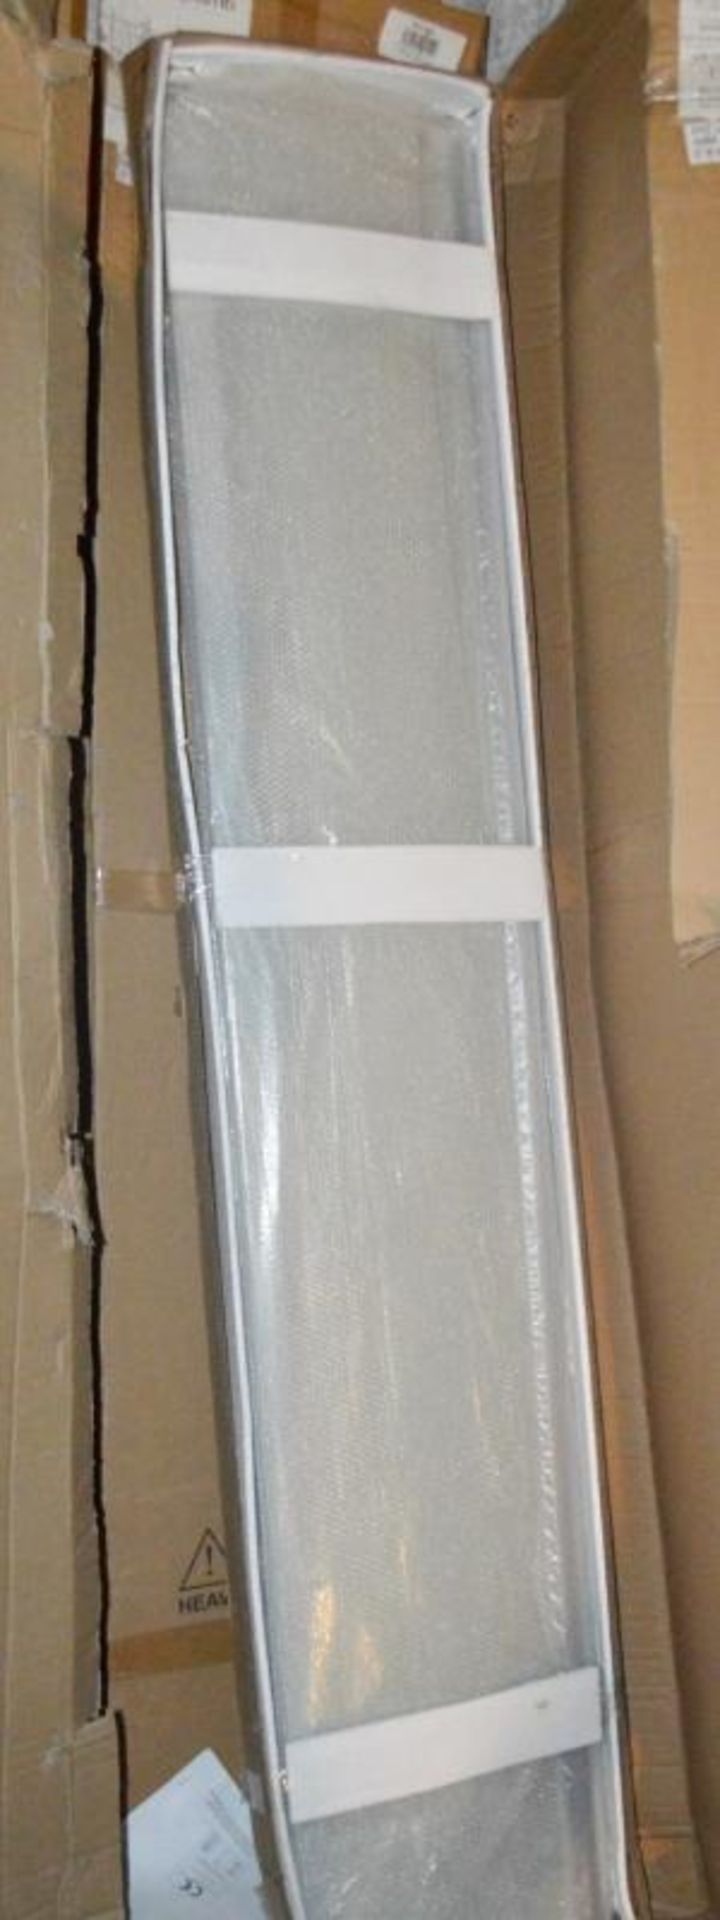 11 x Assorted Shower Screens And Panels - Ref 226 / Ref 641 - New / Unused Boxed Stock - CL269 - Loc - Image 8 of 8